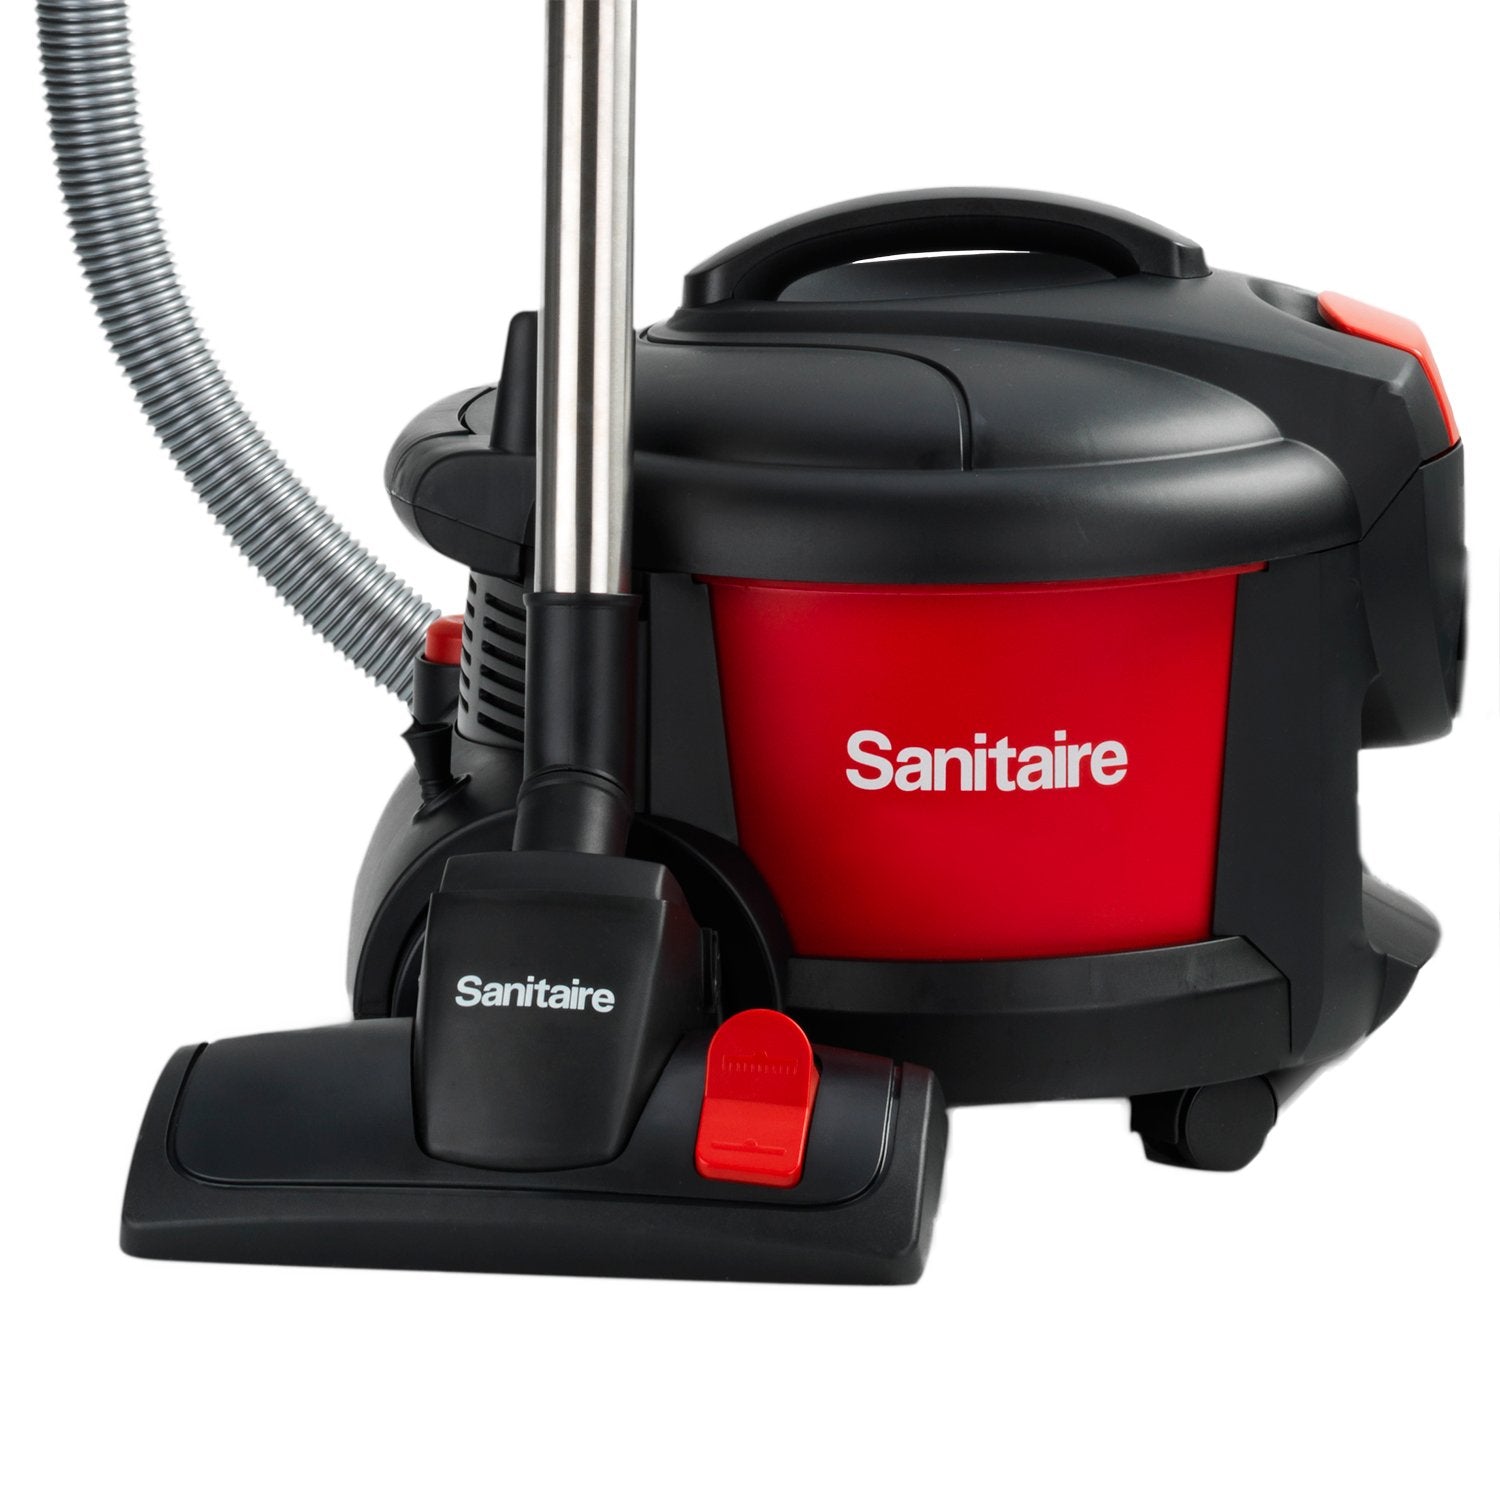 Sanitaire EXTEND™ Canister SC3700A Vacuum Cleaner